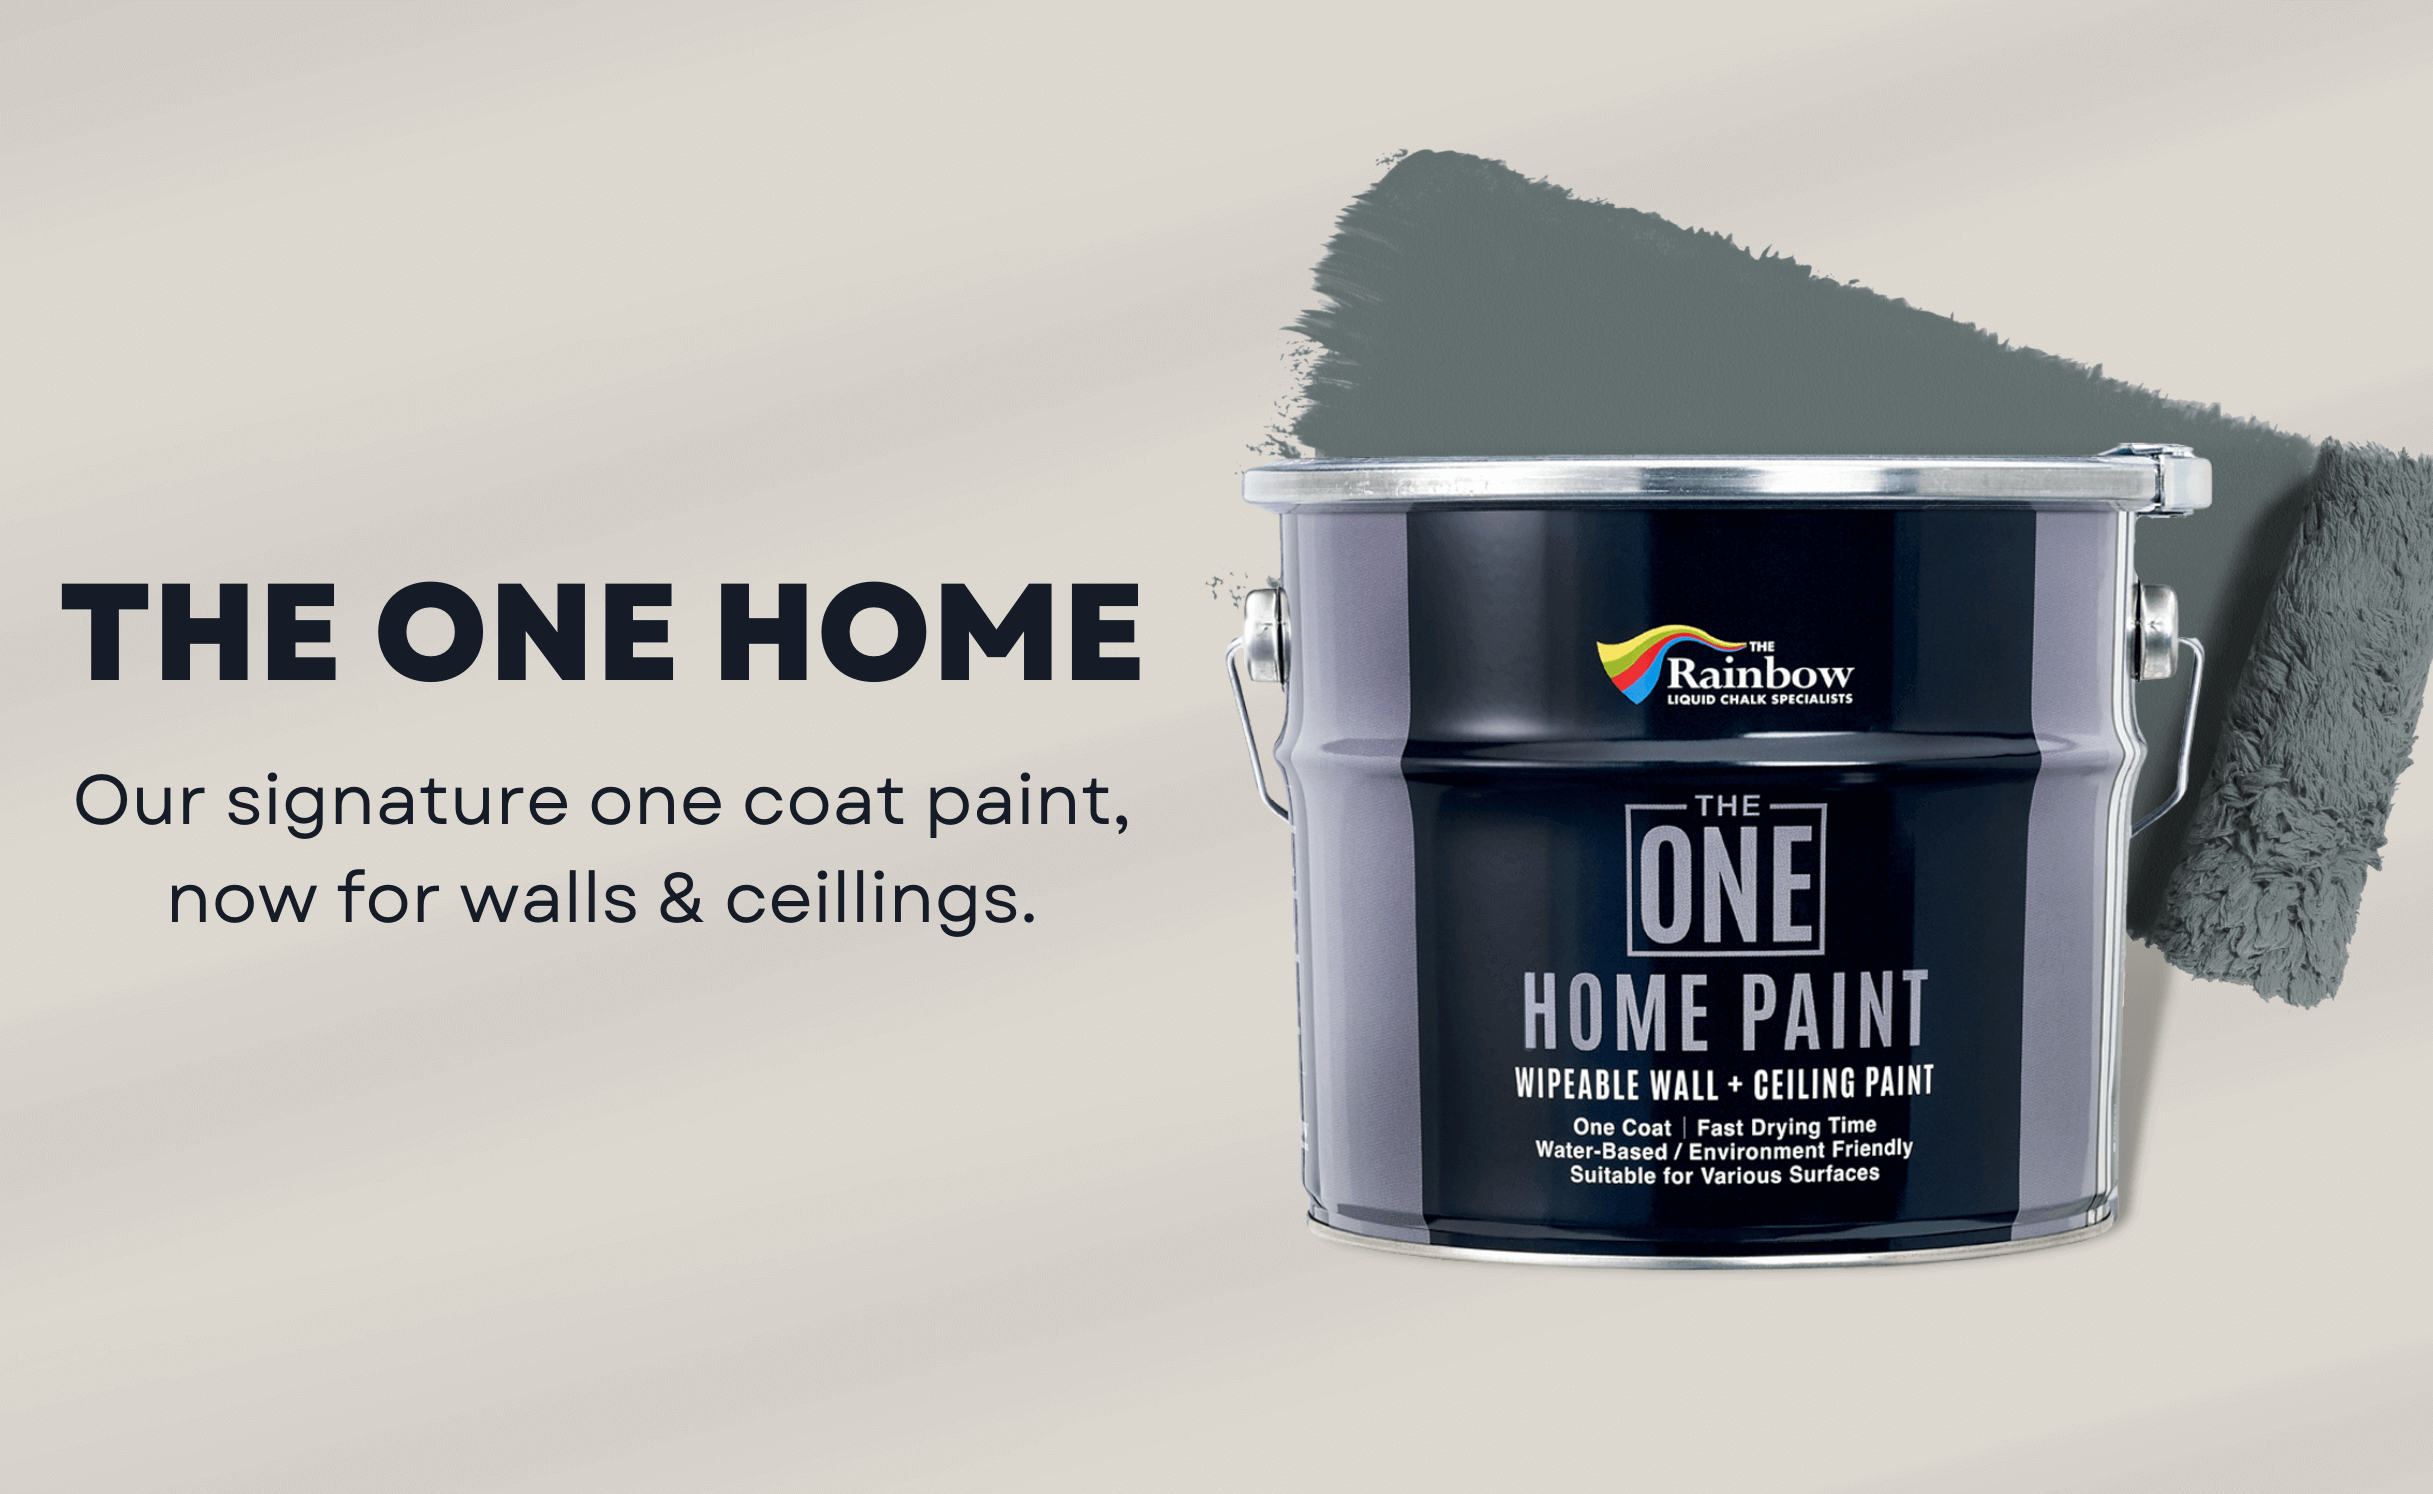 Introducing our new Wipable One Coat Wall and Ceiling Paint